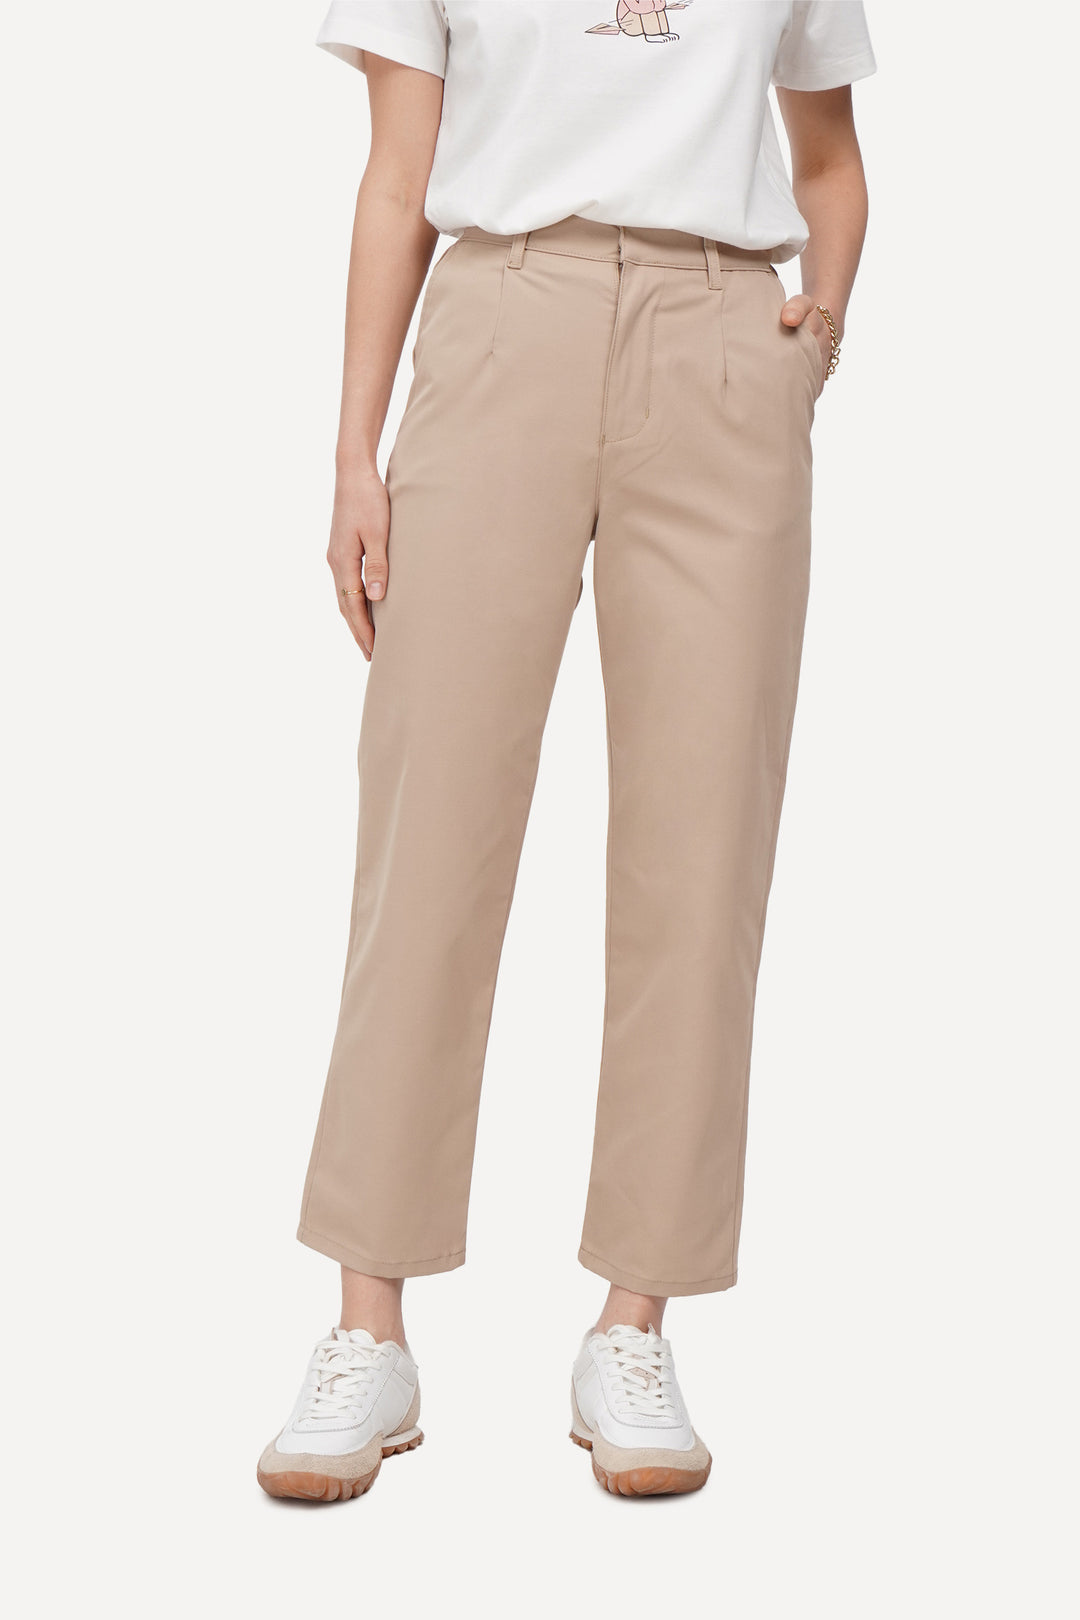 Smart Tapered Trousers – OXGN